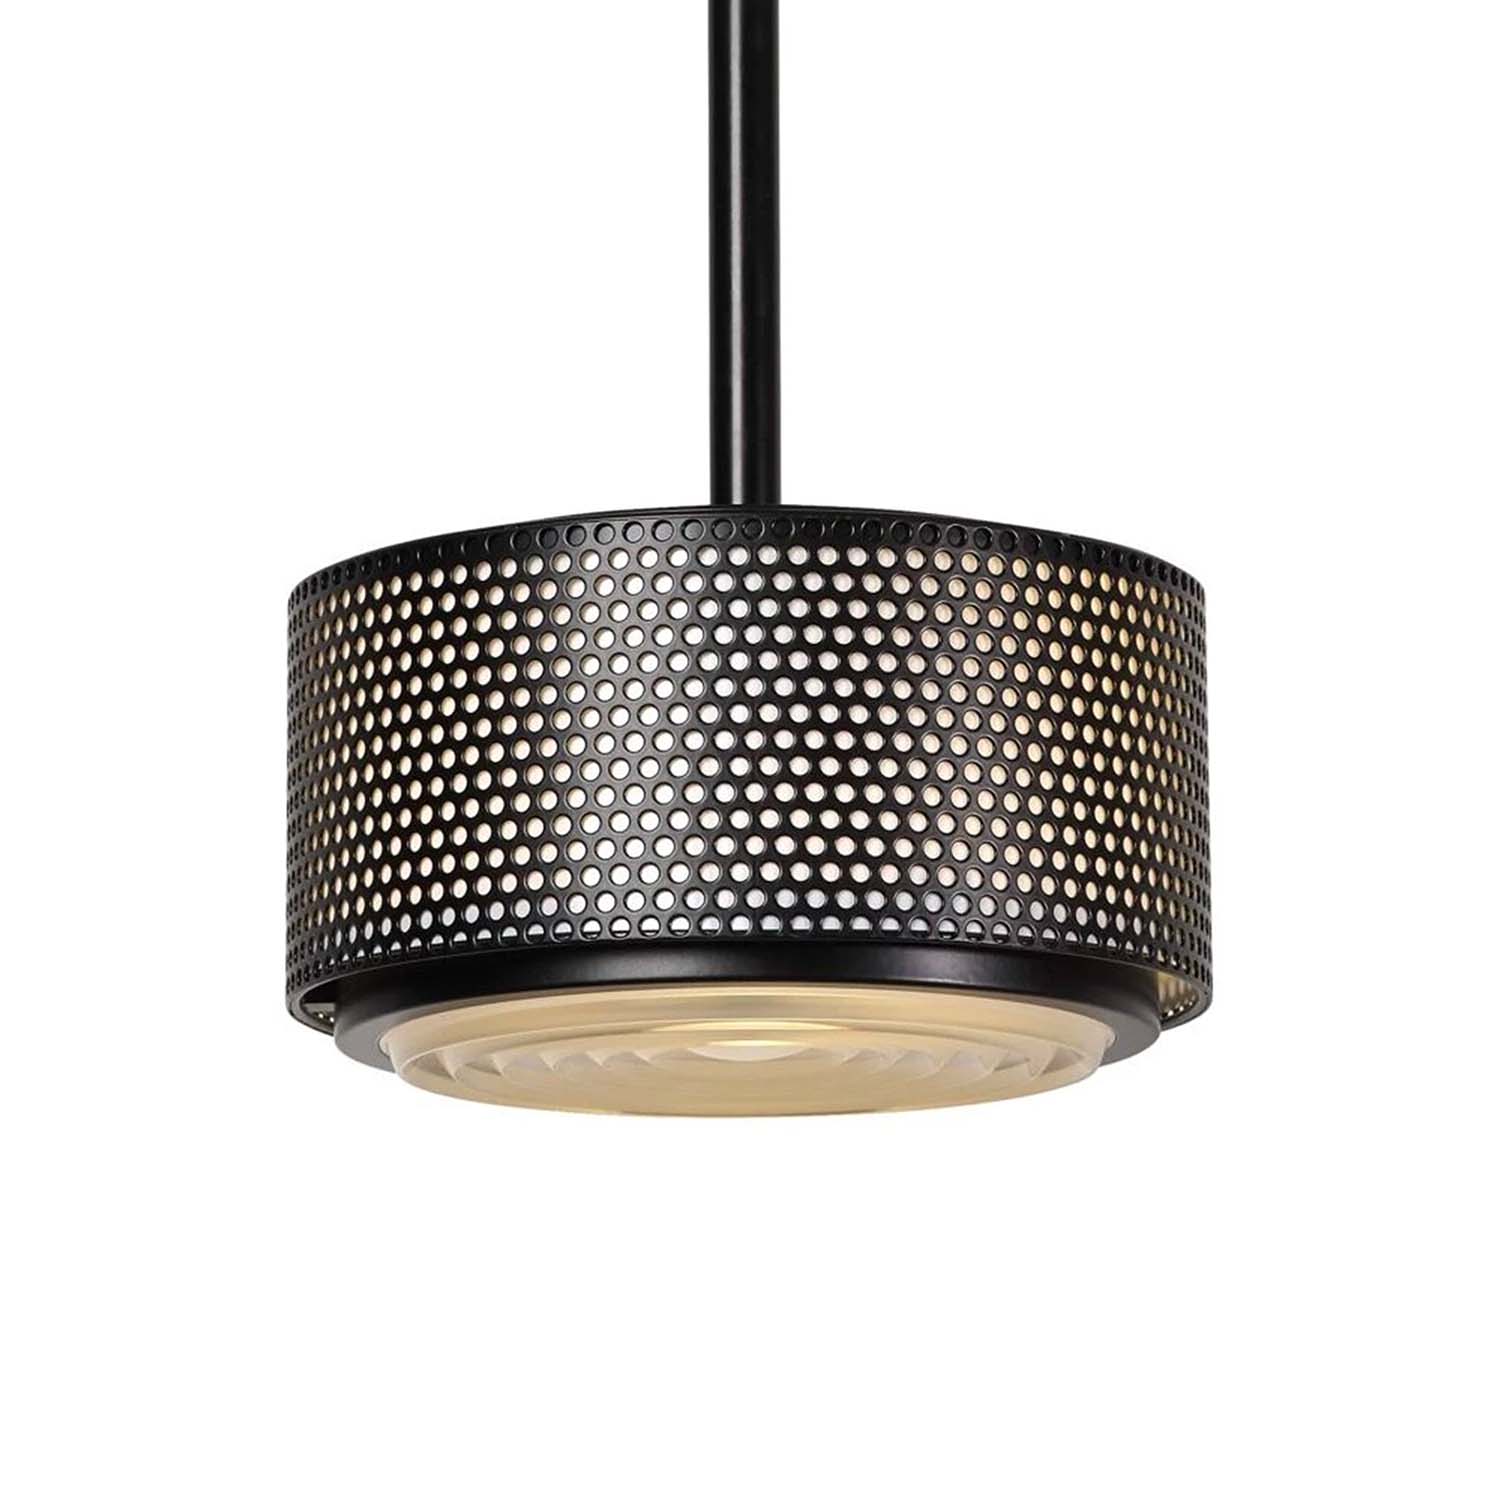 G13A - Vintage 50s pendant light in perforated steel design